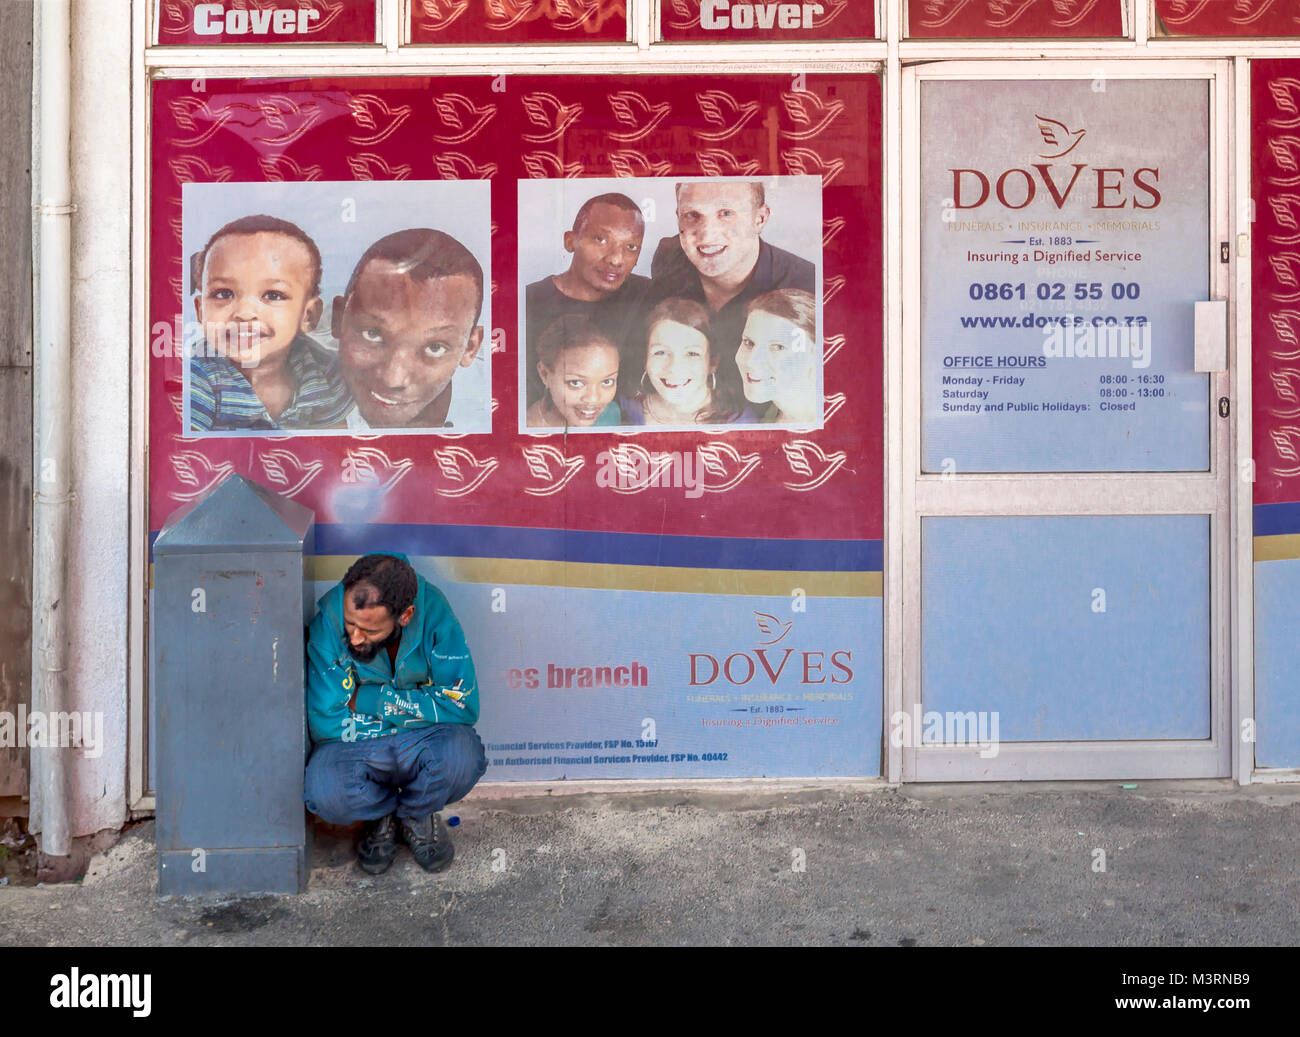 Street scene in Cape Town, South Africa. The man is crouching in front of a business that offers funeral services. Stock Photo